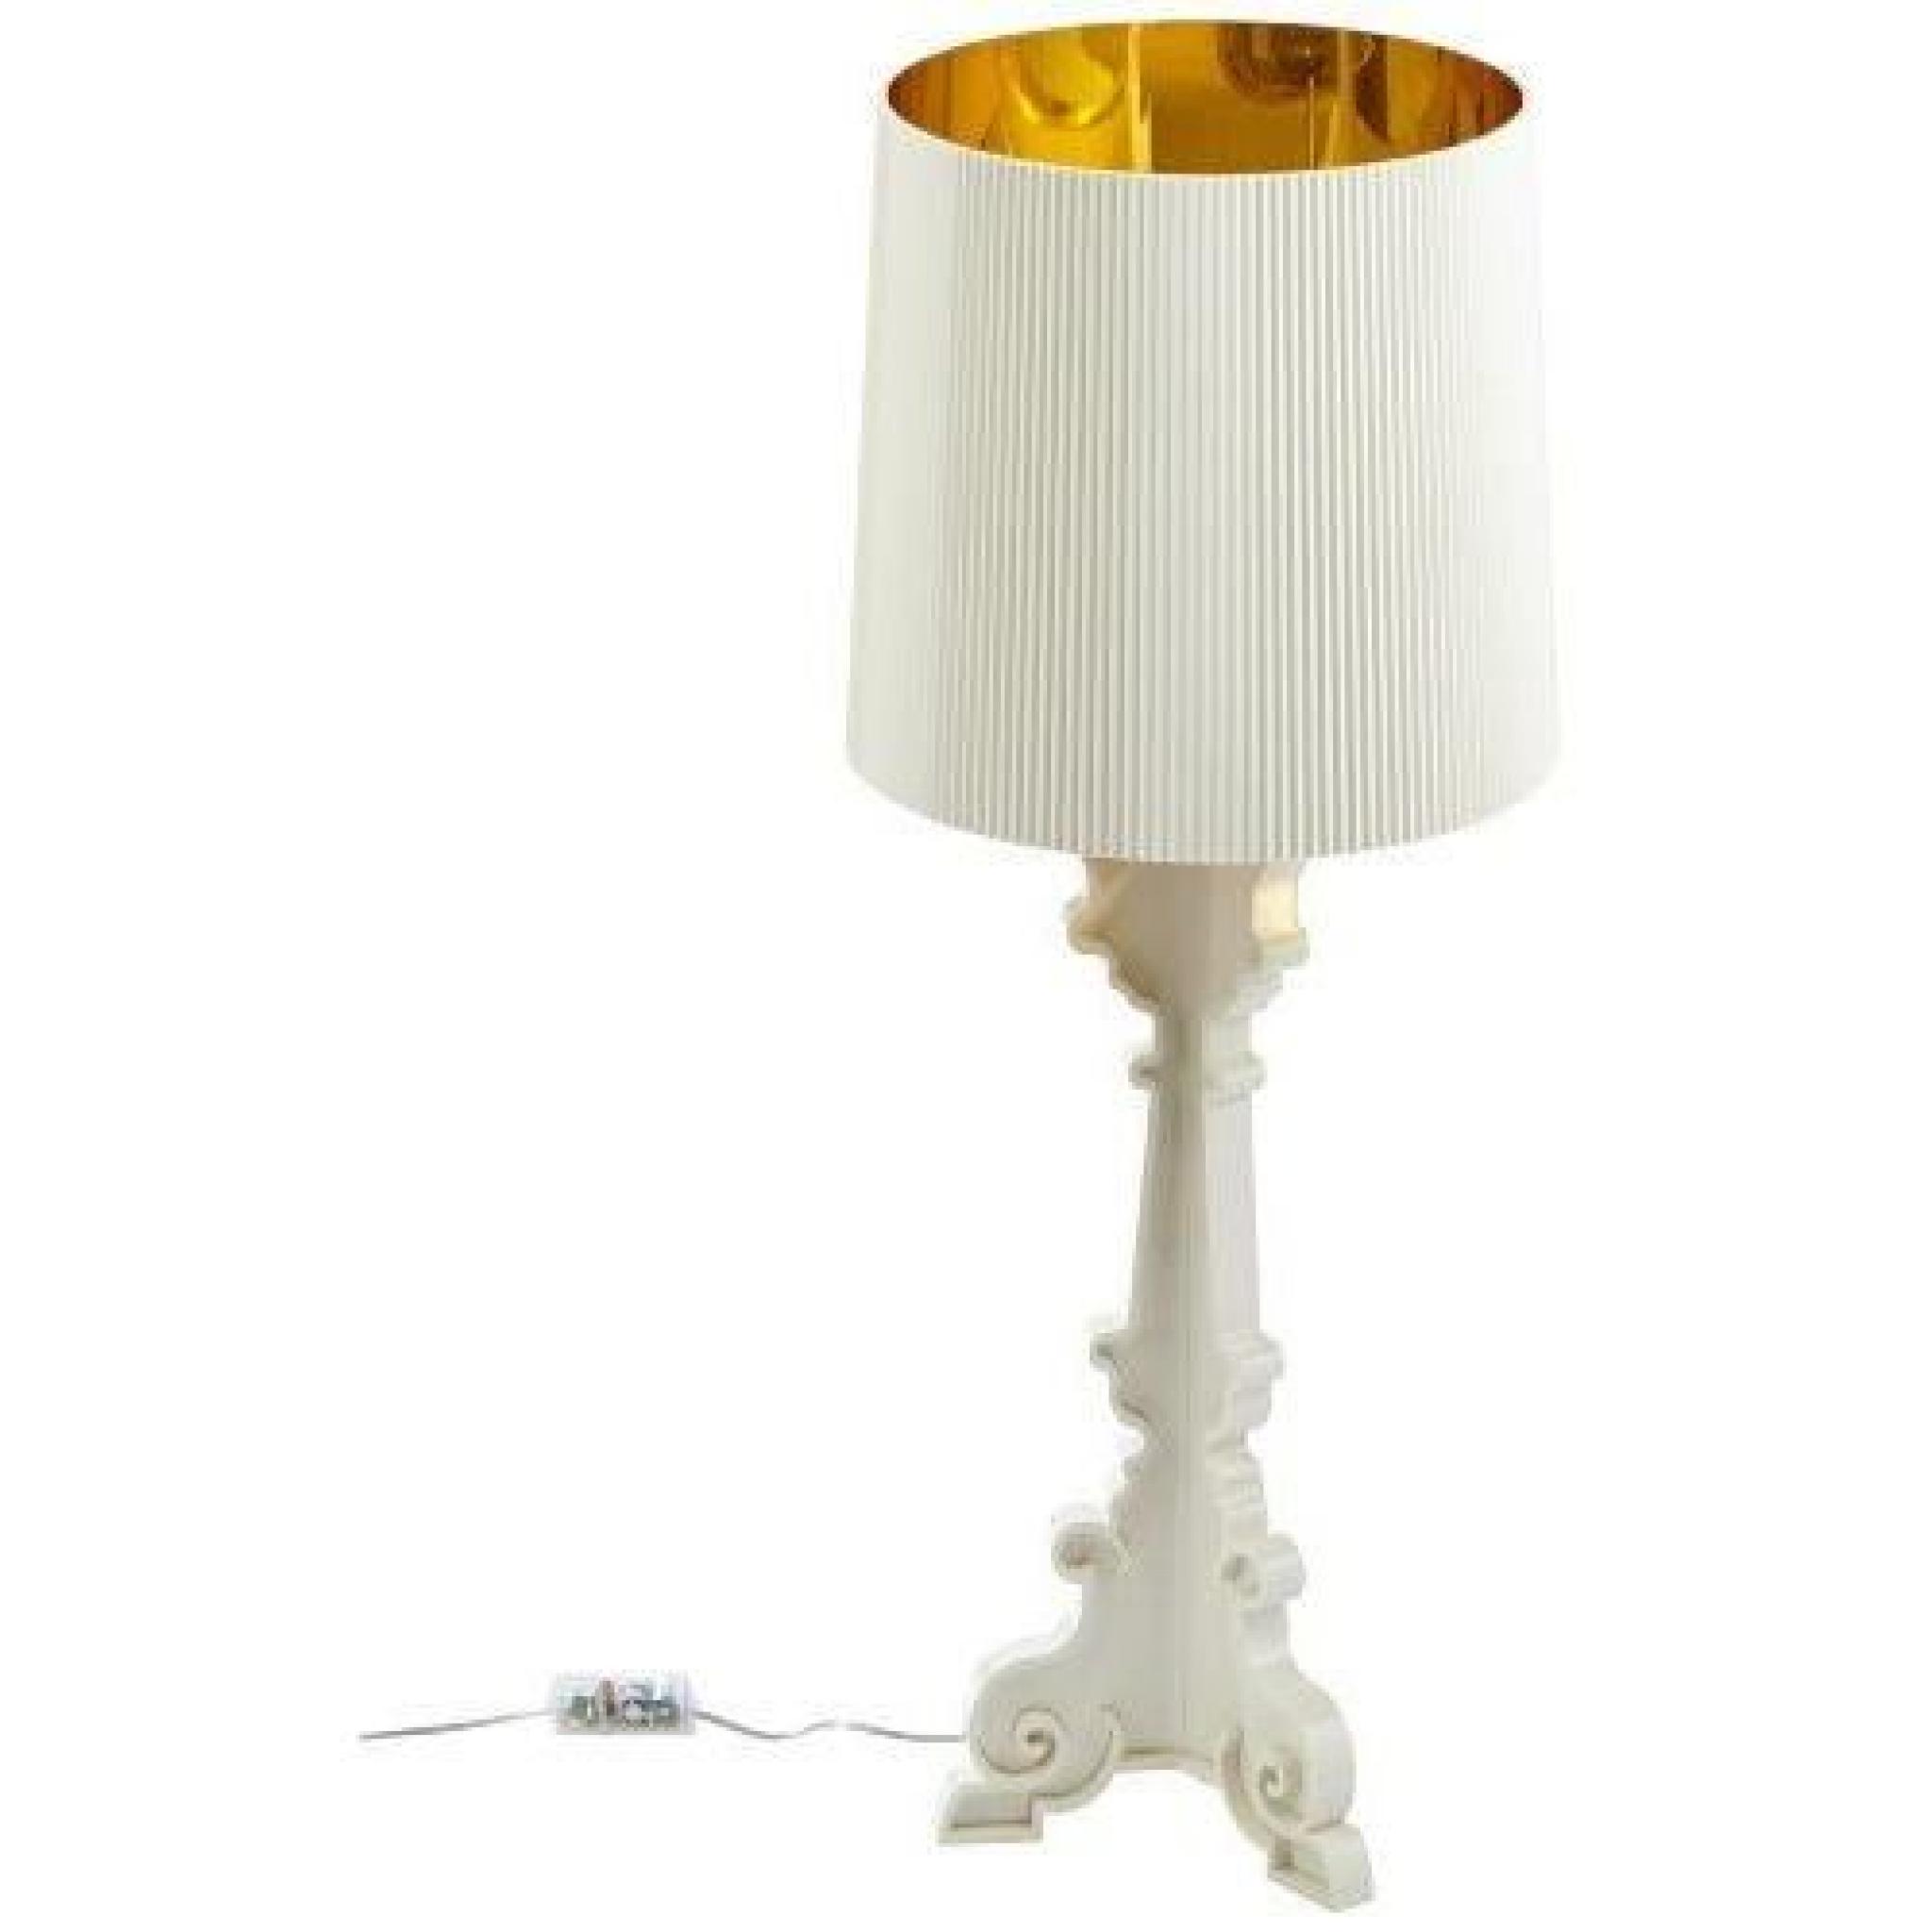 Kartell 907600 Lampe de table Bourgie (Blanc/or)